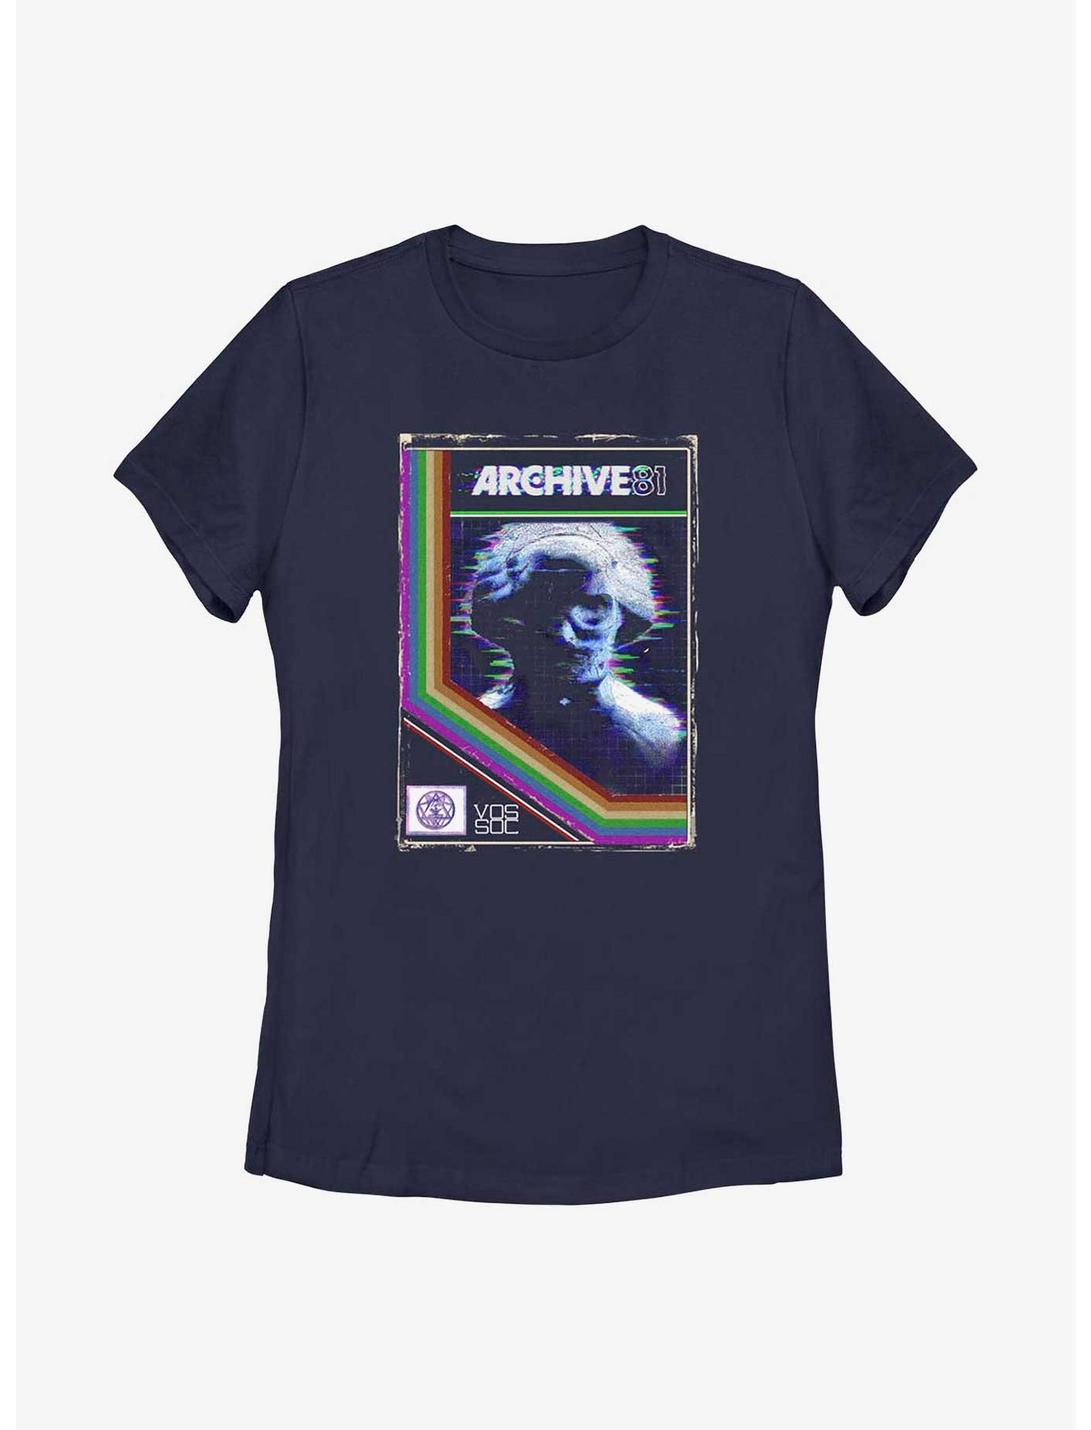 Archive 81 Vos Society Womens T-Shirt, NAVY, hi-res